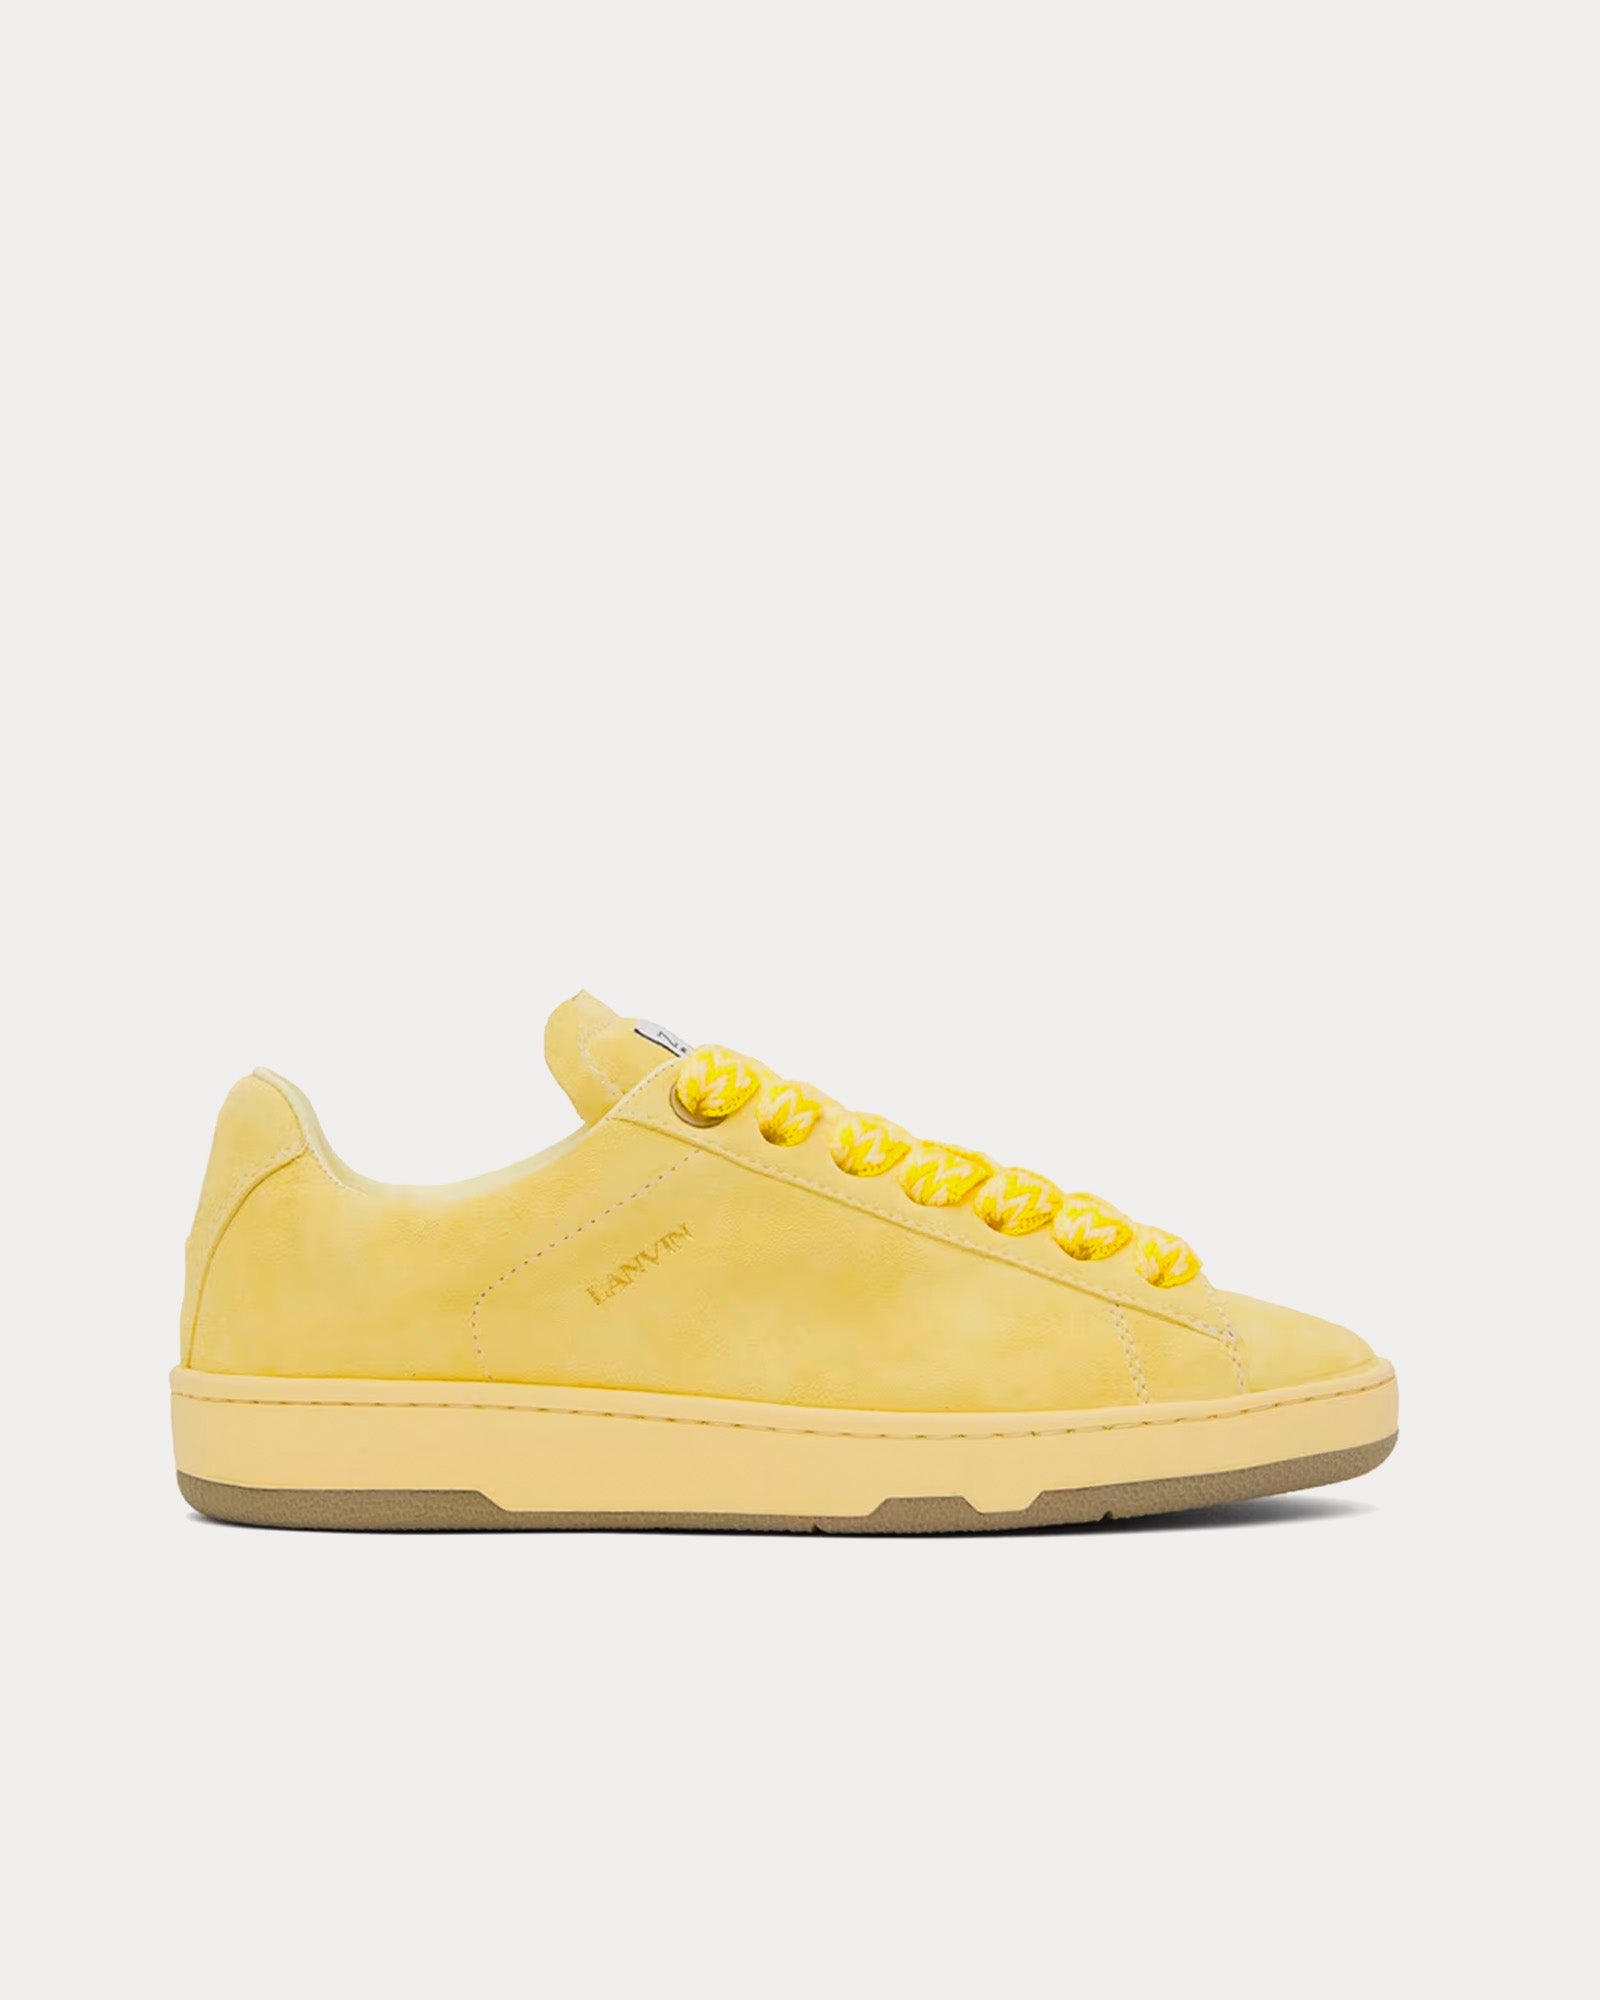 Lanvin - Lite Curb Suede Chamomile Yellow Low Top Sneakers